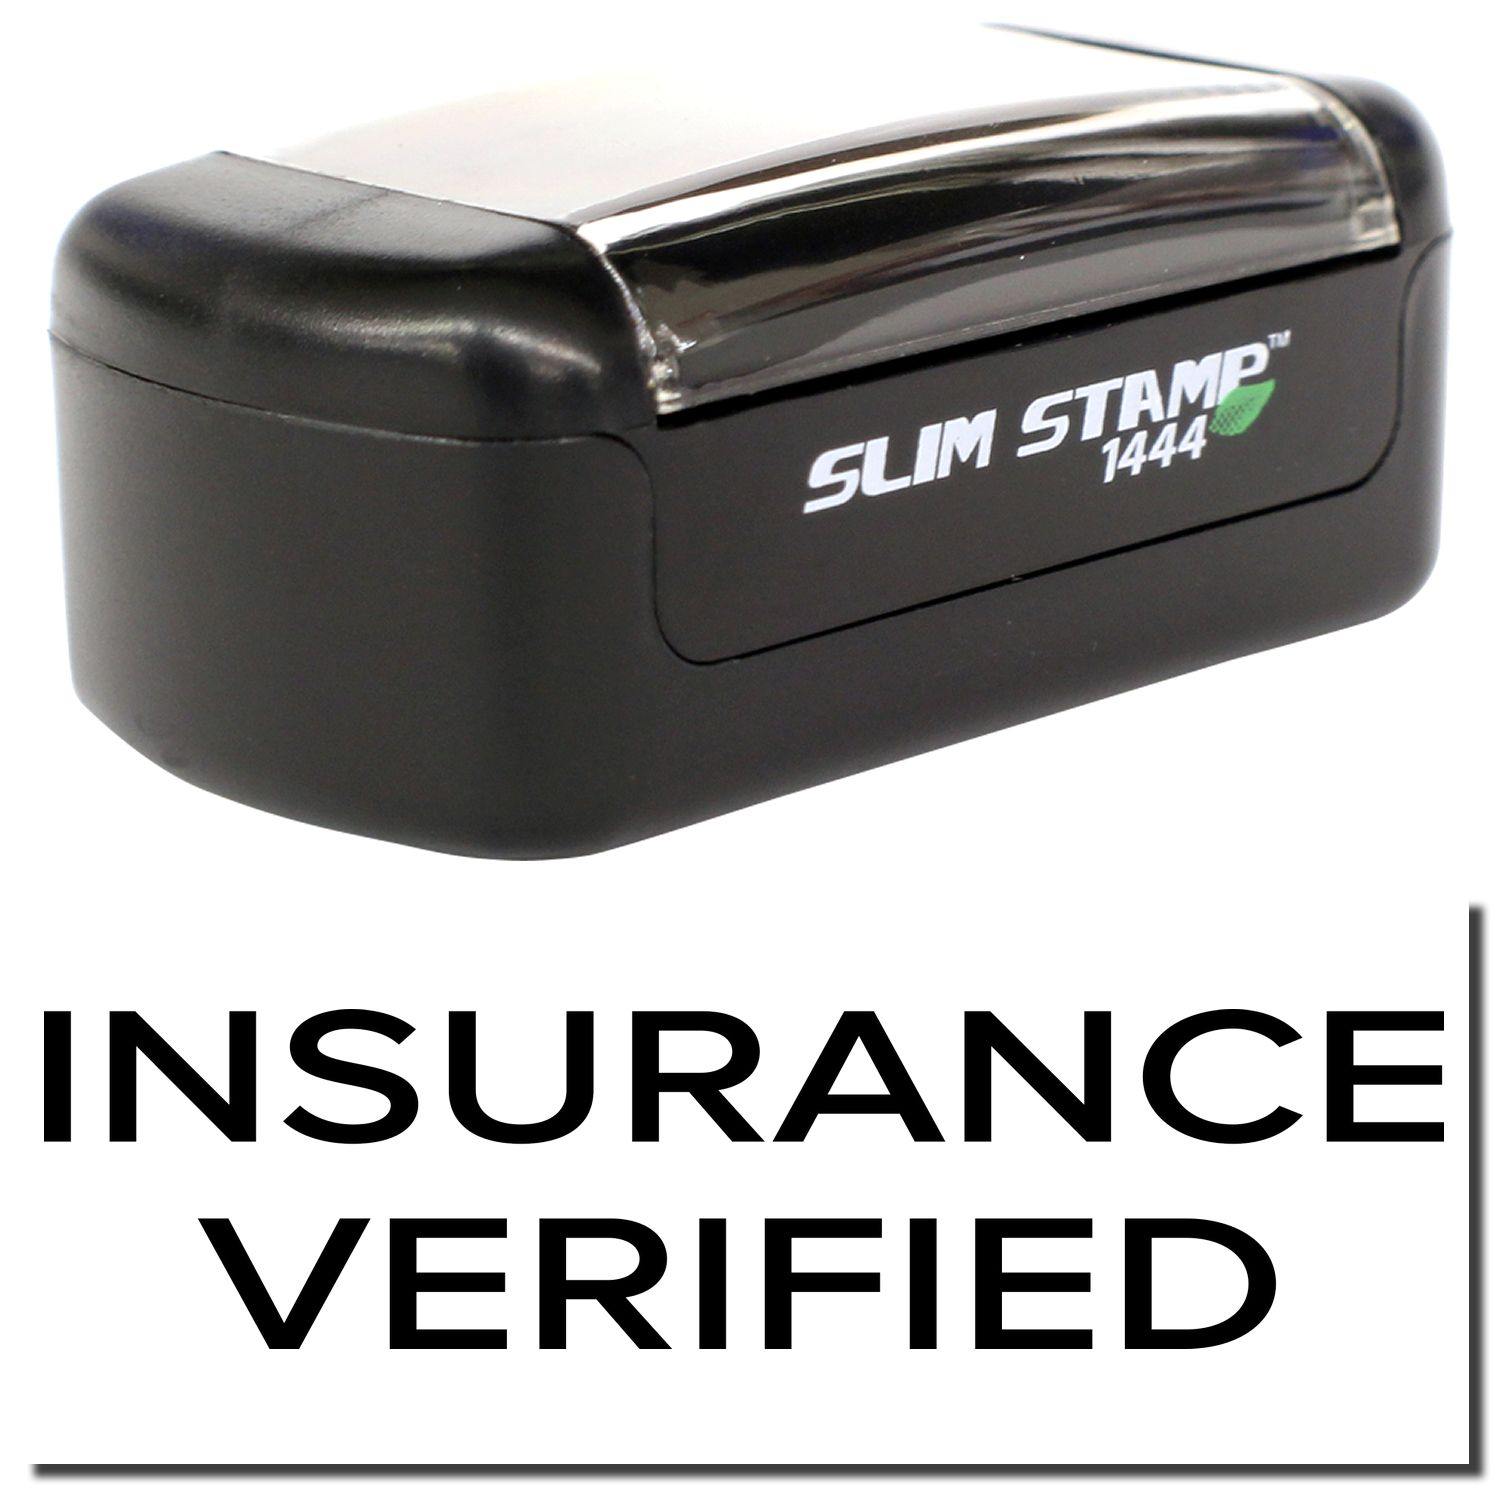 A stock office pre-inked stamp with a stamped image showing how the text "INSURANCE VERIFIED" in a narrow font is displayed after stamping.